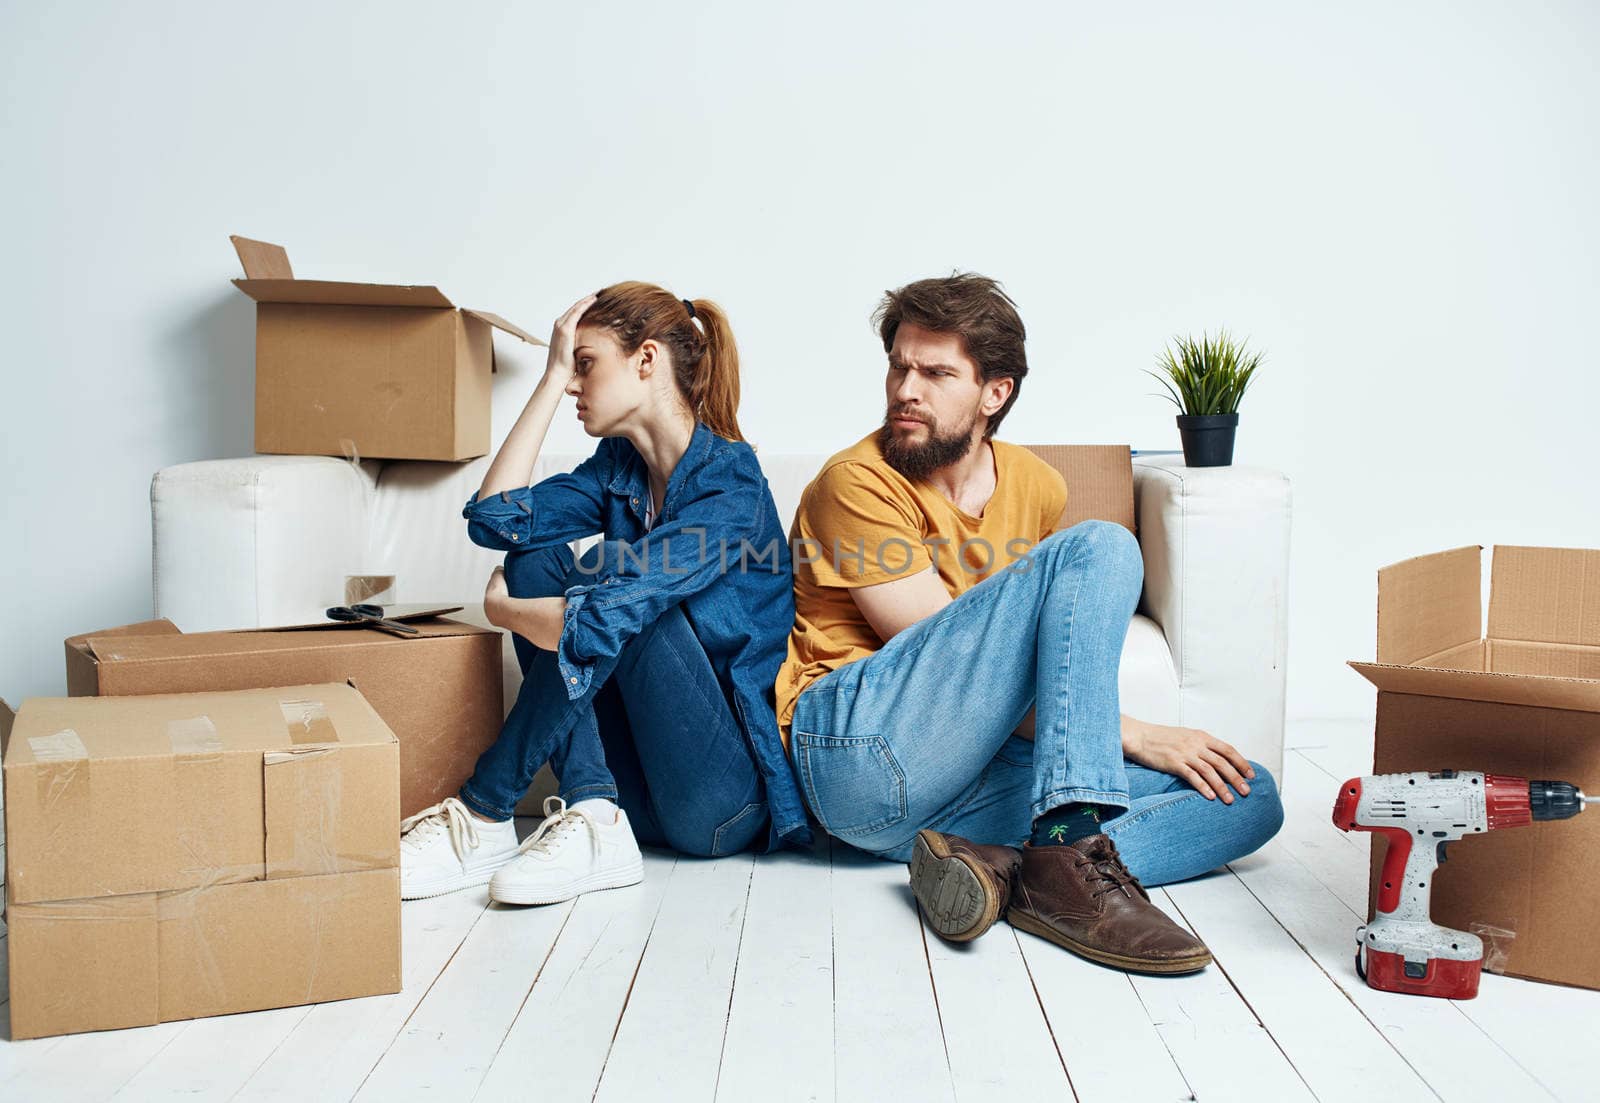 Portrait of man and woman with boxes moving plans for the future apartment by SHOTPRIME